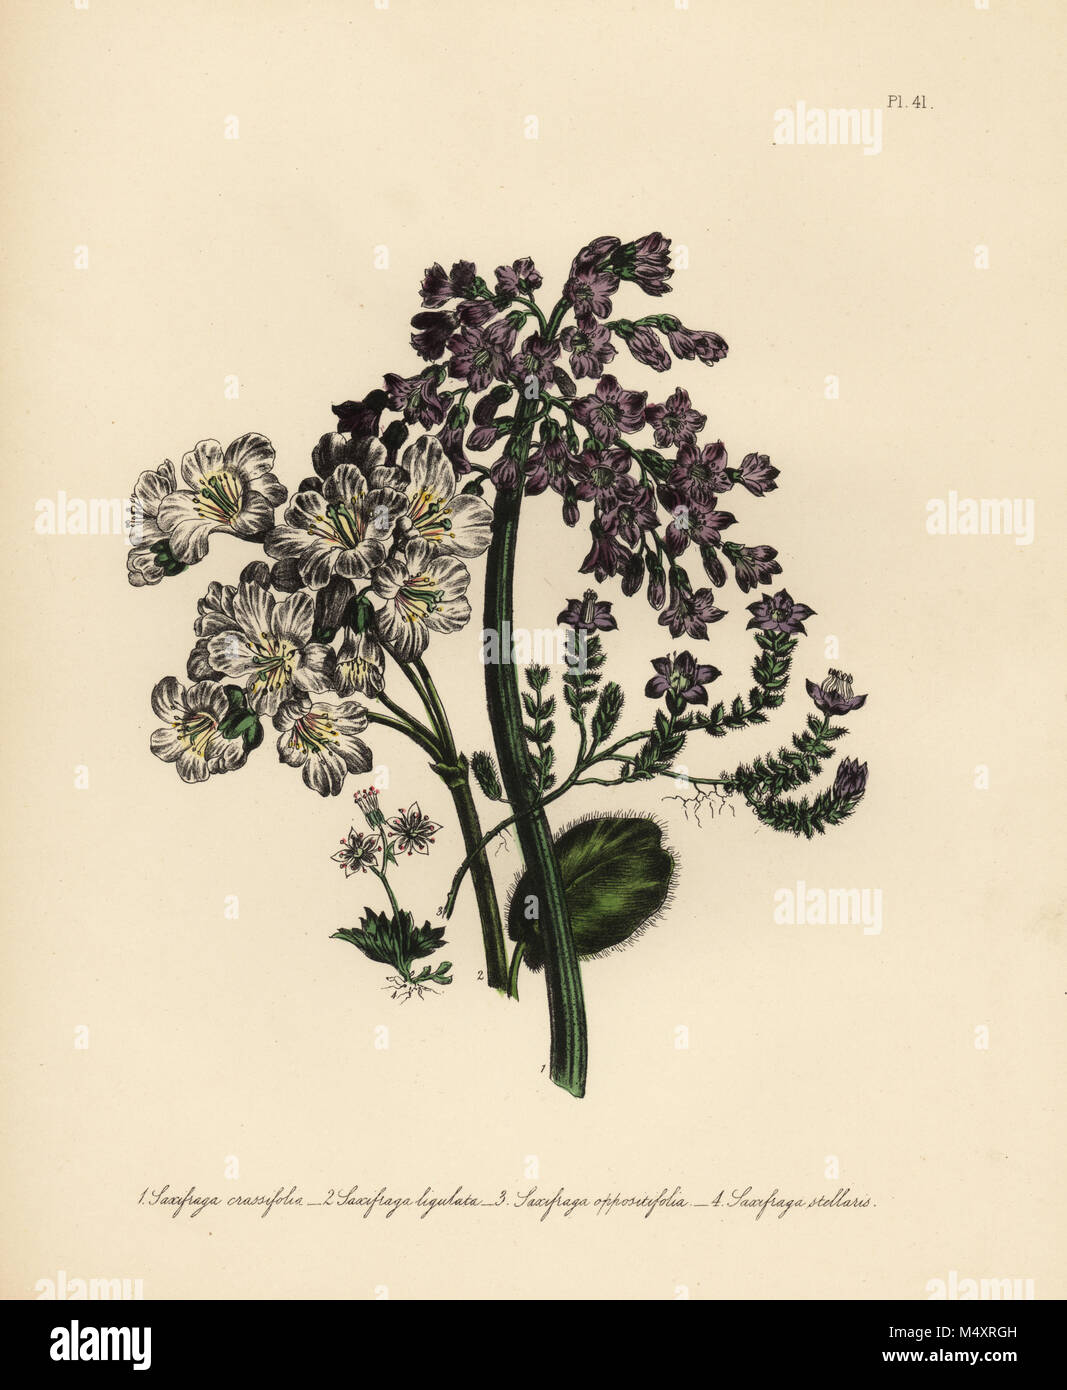 Thick-leaved saxifrage, Saxifragus crassifolia, Nepaul saxifrage, Saxifragus ligulata, Saxifragus appositifolia and Saxifragus stellaris. Handfinished chromolithograph by Henry Noel Humphreys after an illustration by Jane Loudon from Mrs. Jane Loudon's Ladies Flower Garden of Ornamental Perennials, William S. Orr, London, 1849. Stock Photo